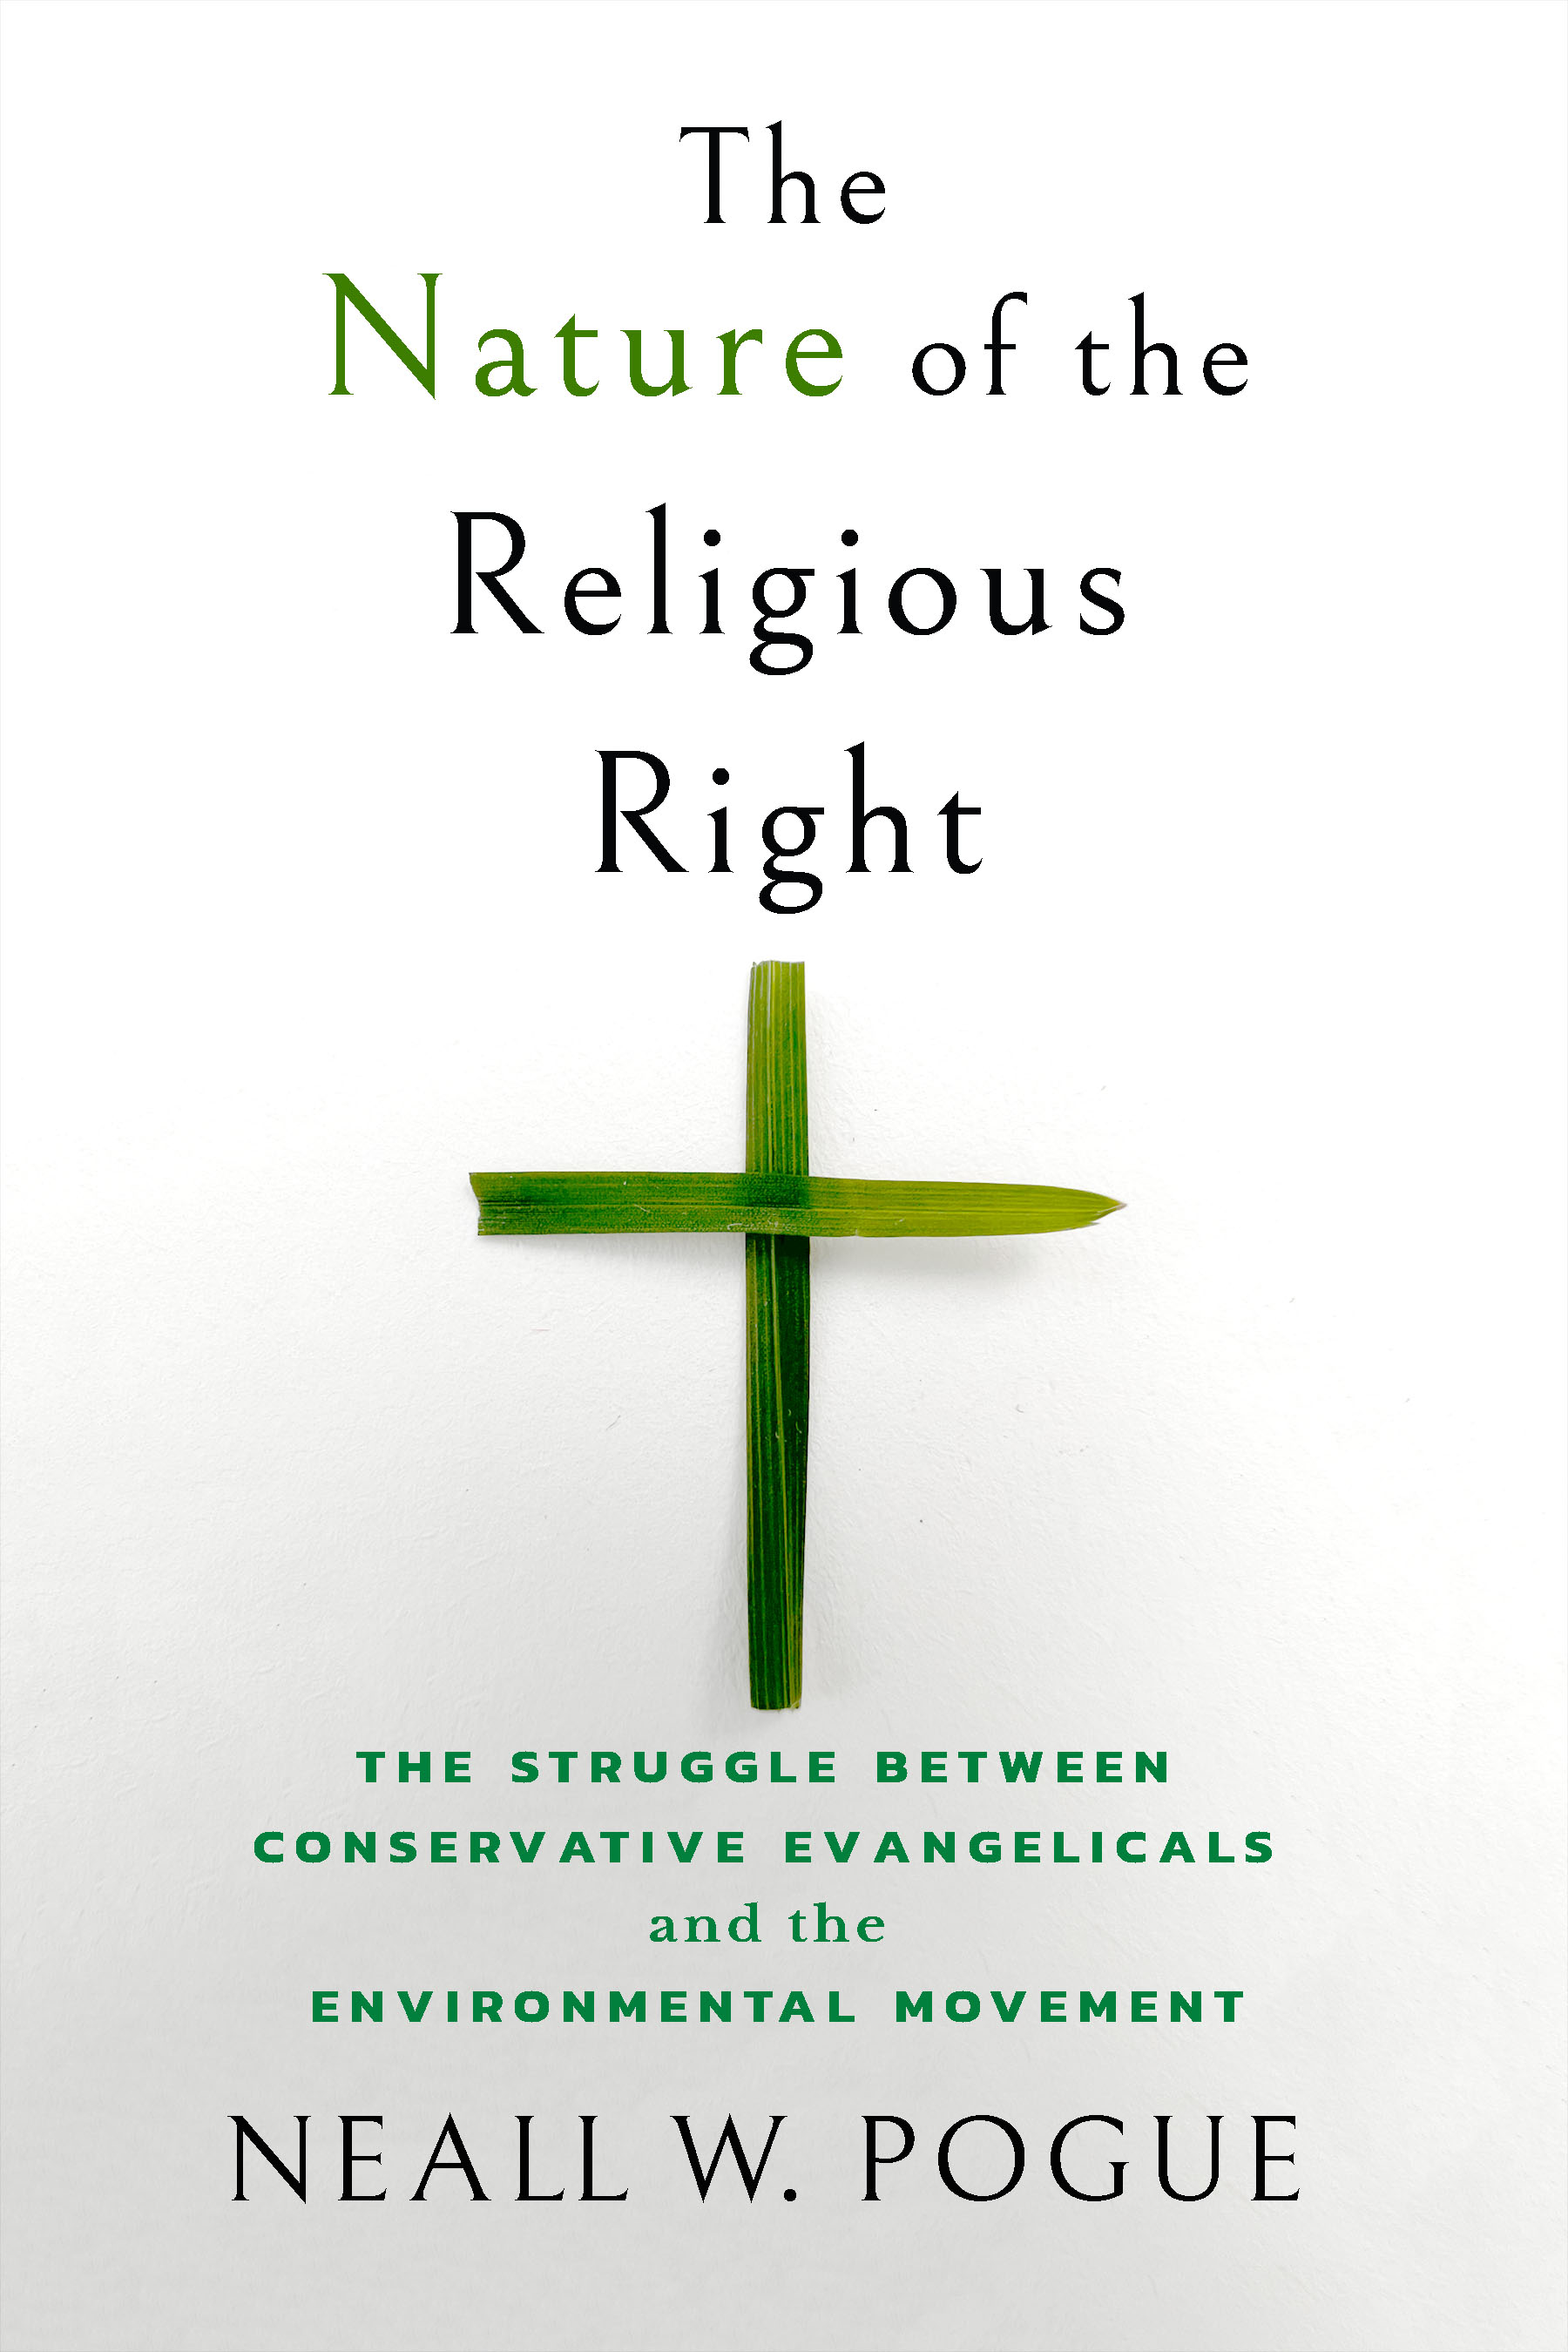 Book Cover for The Nature of the Religious Right: The Struggle Between Conservative Evangelicals and the Environmental Movement by Neall W. Pogue